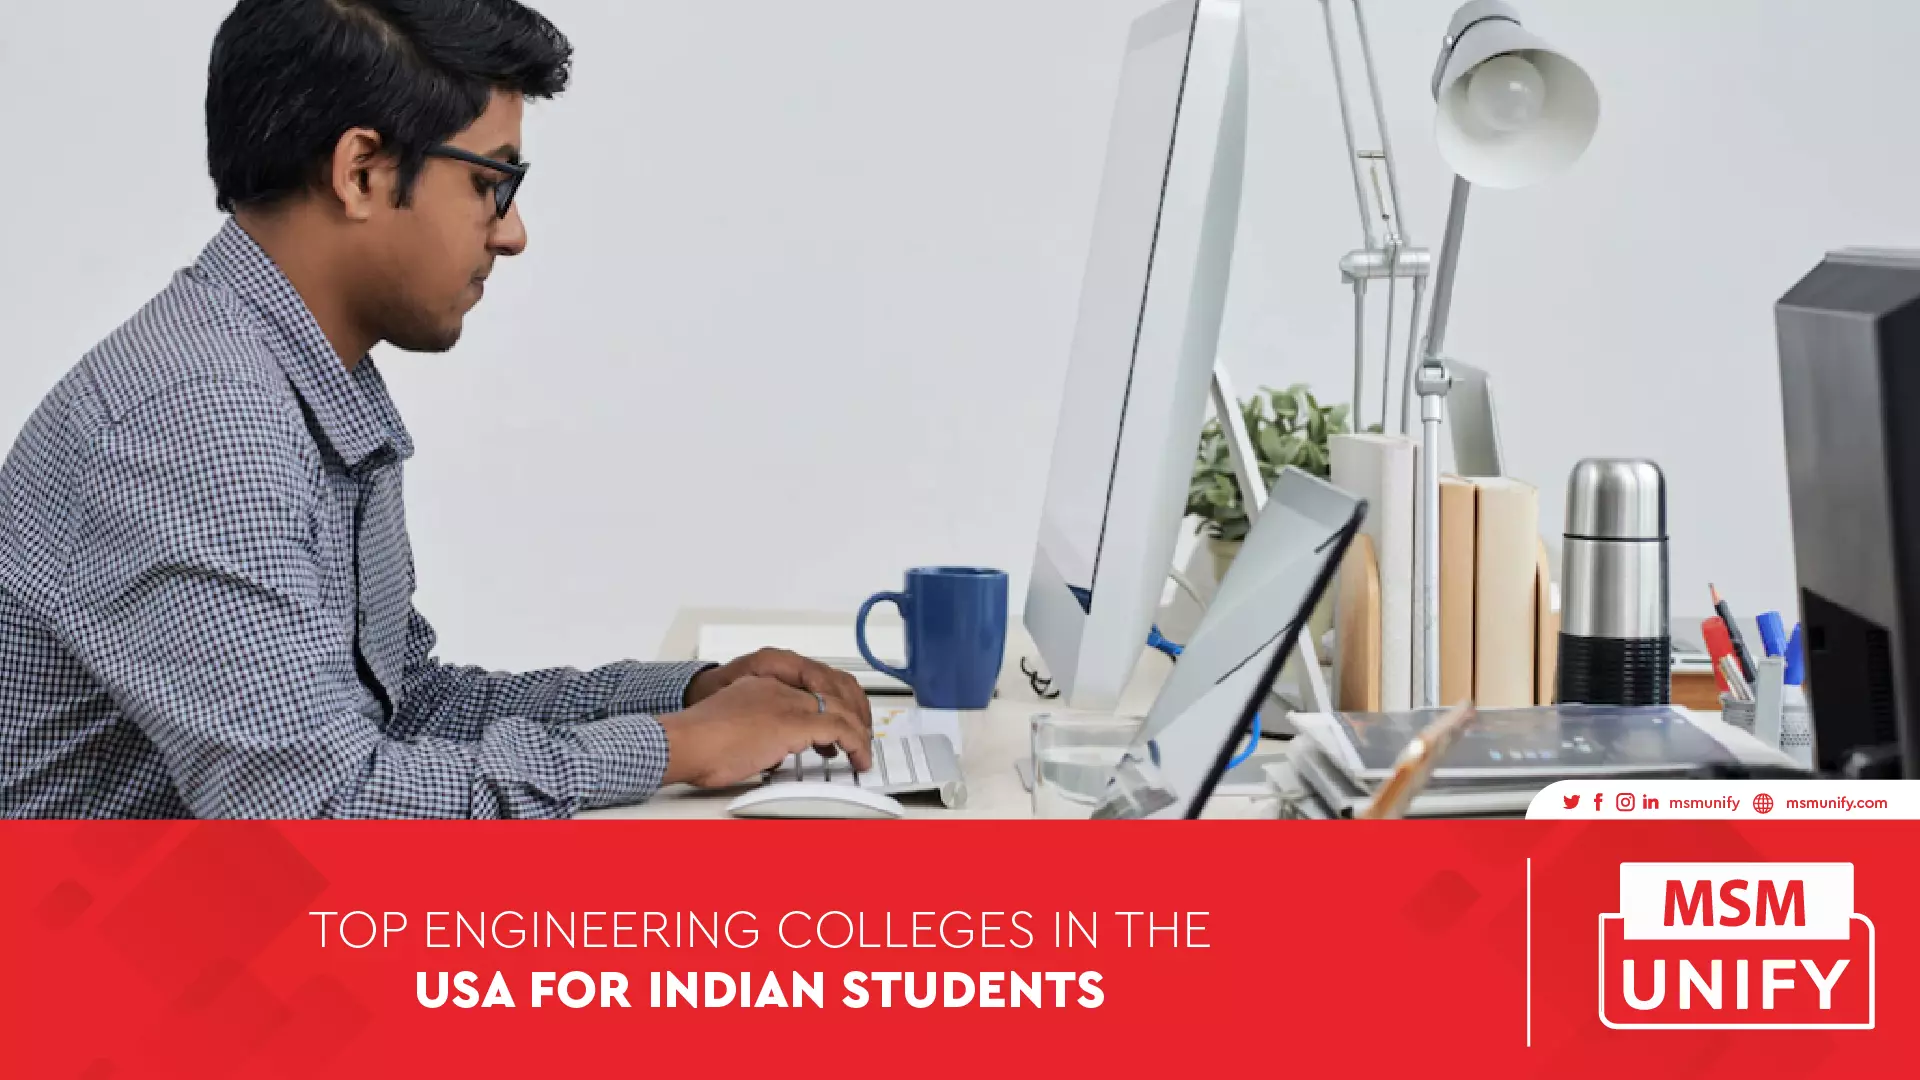 121422 MSM Unify Top Engineering Colleges in the USA for Indian Students 01